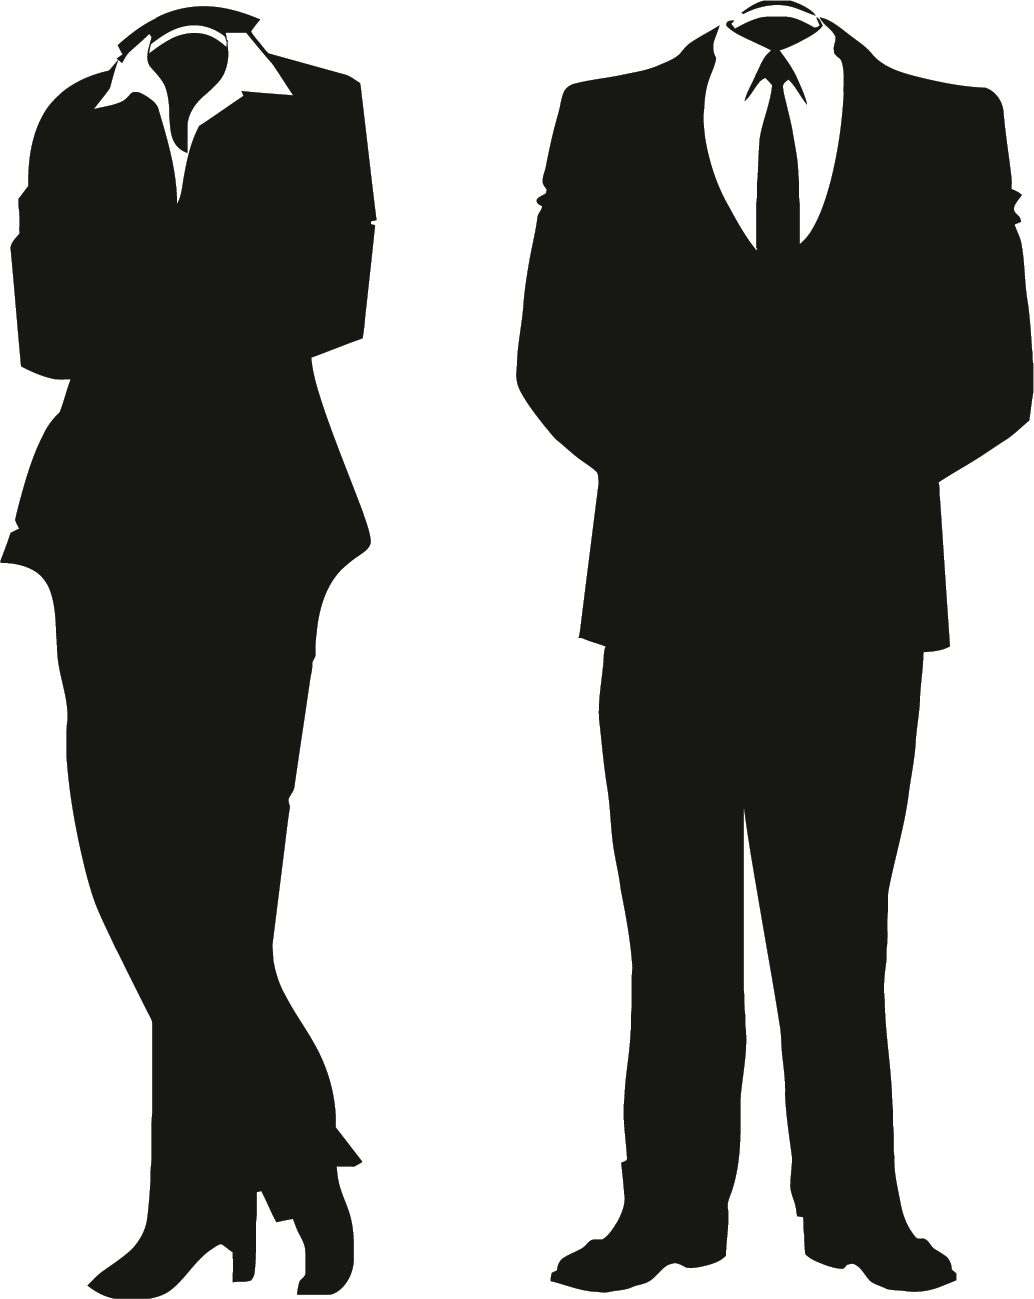 Men in suits silhouette. Mr clipart suited man